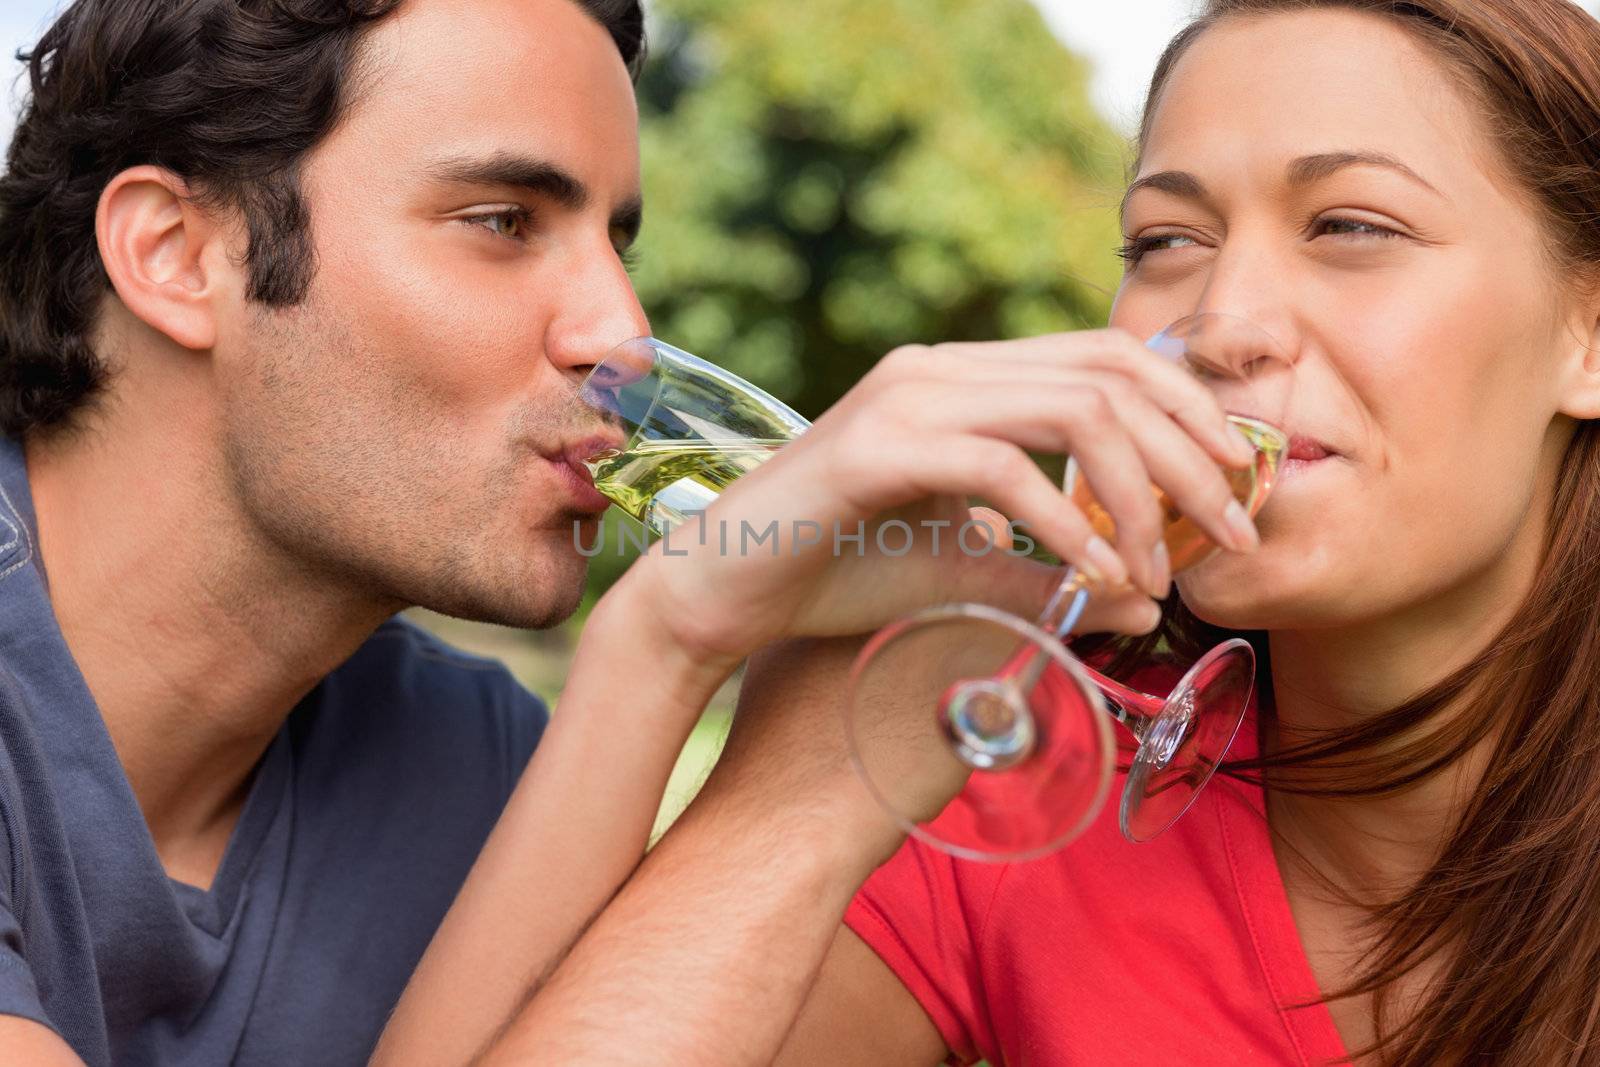 Two friends looking into each others eyes as they link their arms together while drinking champagne in a park